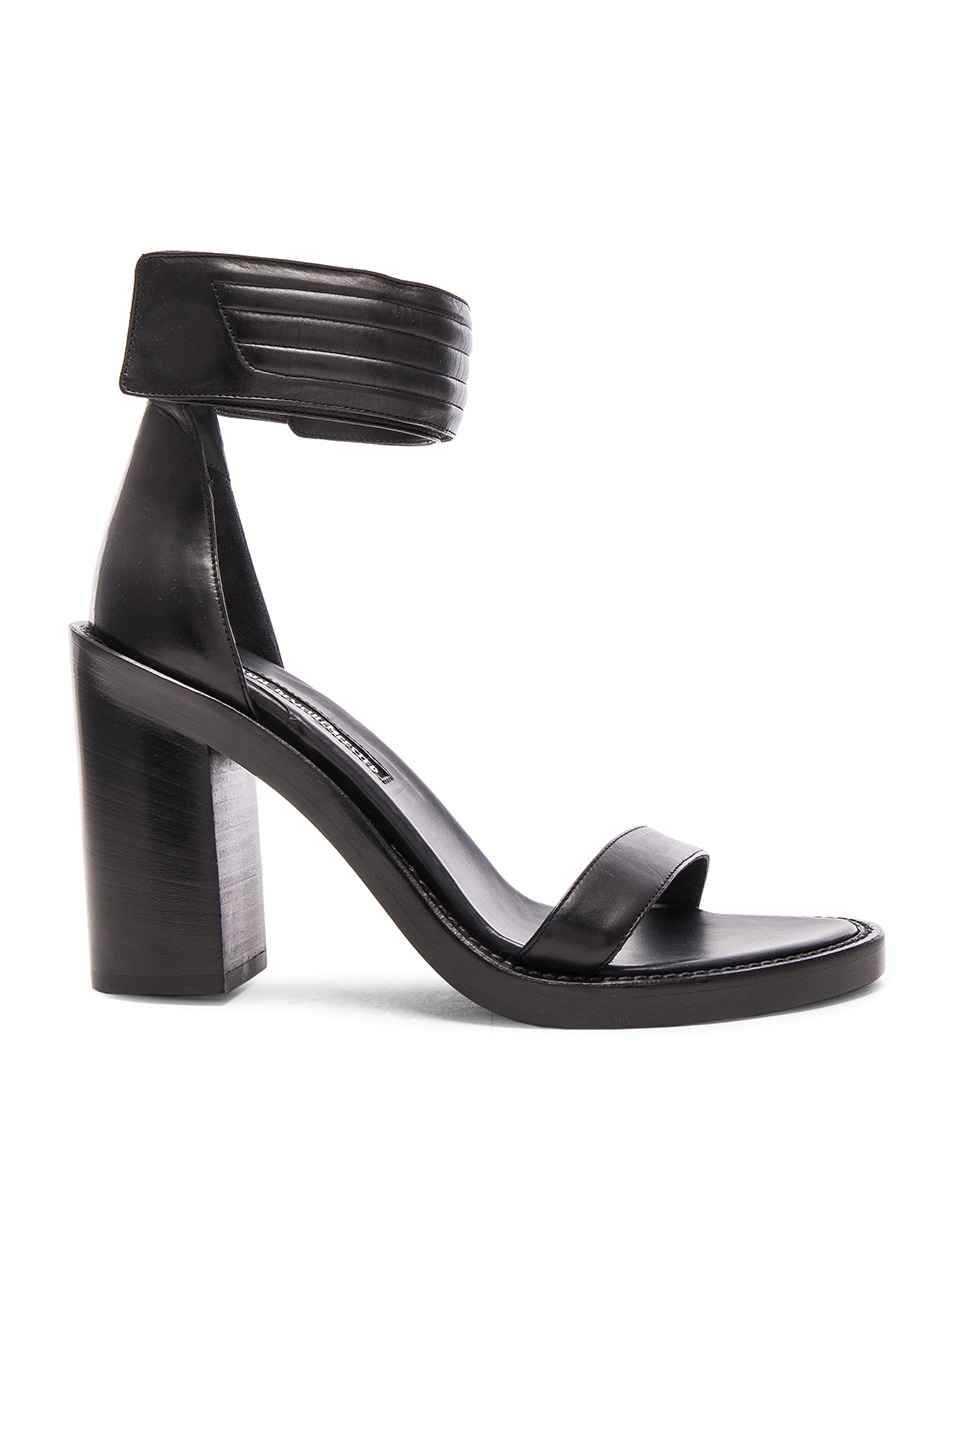 Image 1 of Ann Demeulemeester Leather Ankle Strap Heels in Black